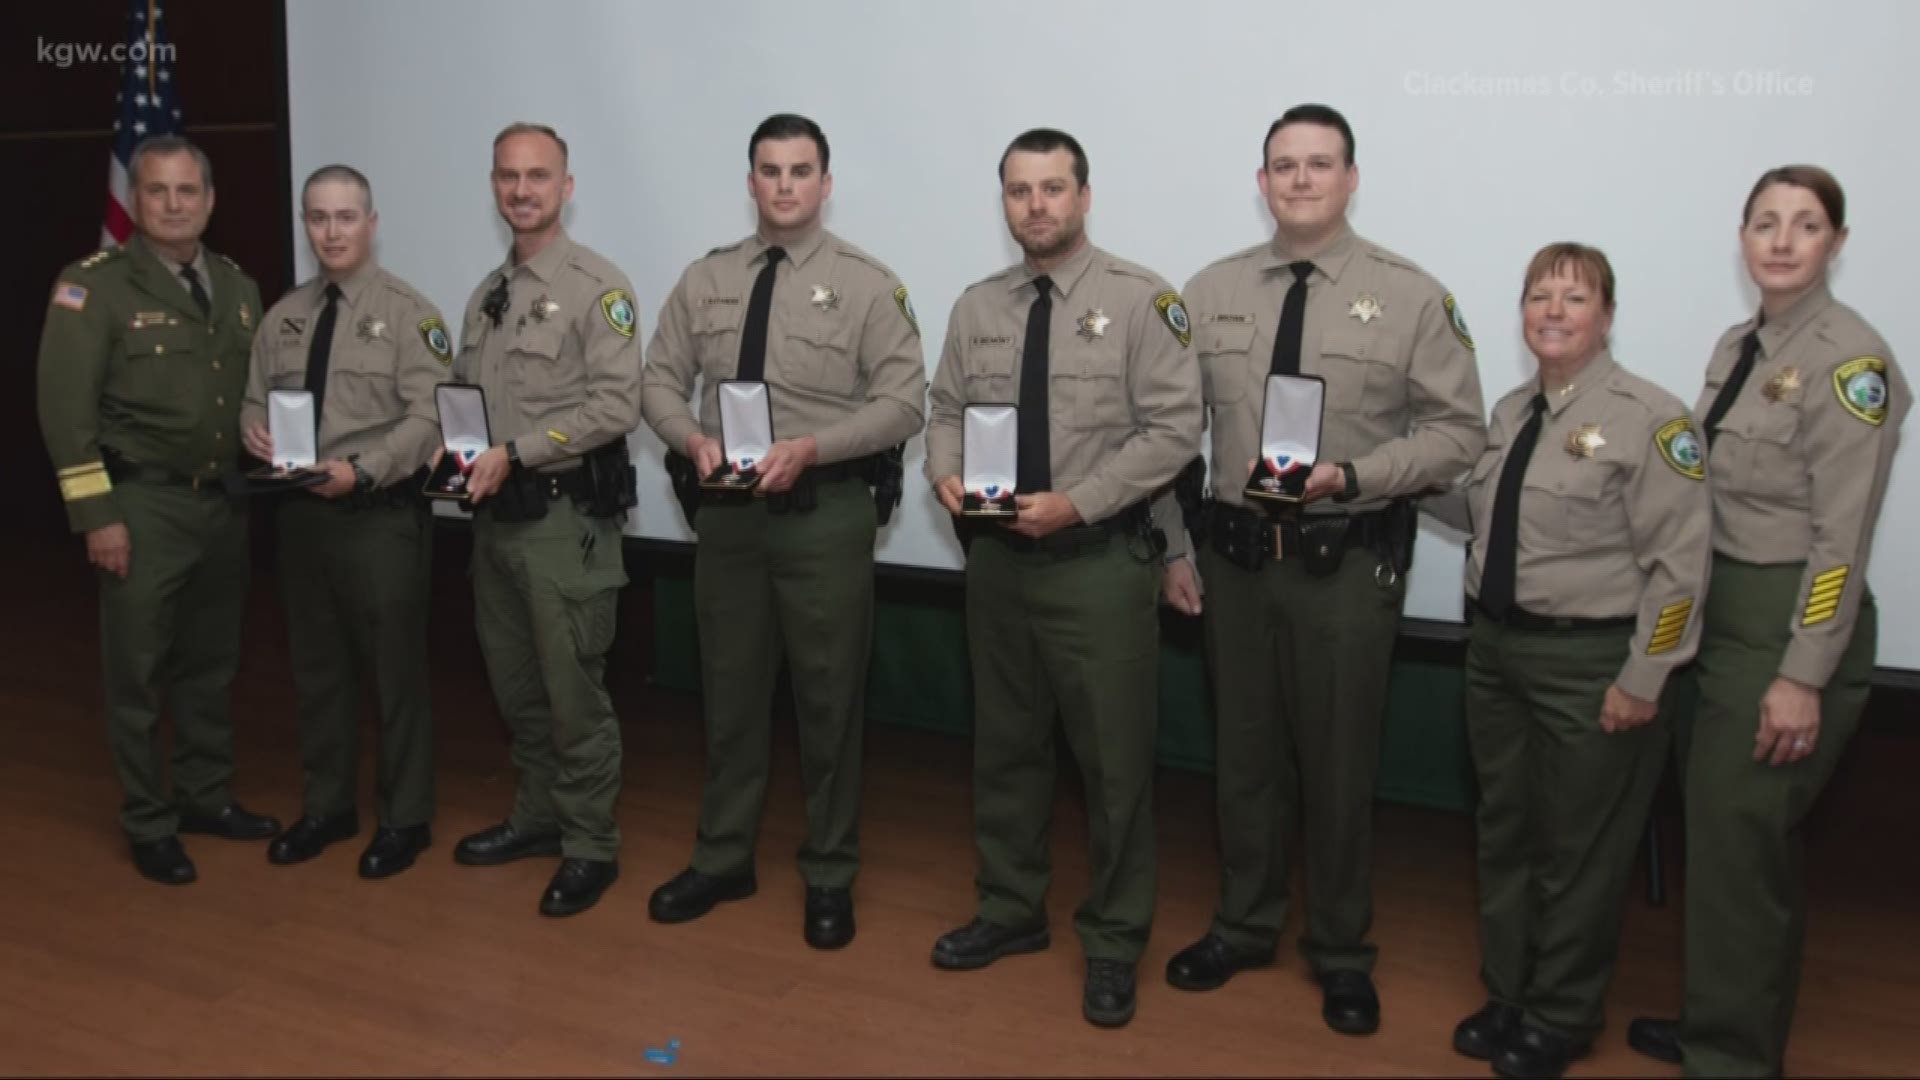 Five Clackamas County Sheriff’s Office deputies were recognized for their heroism after pulling a man to safety after he was shot in the head in November 2018.